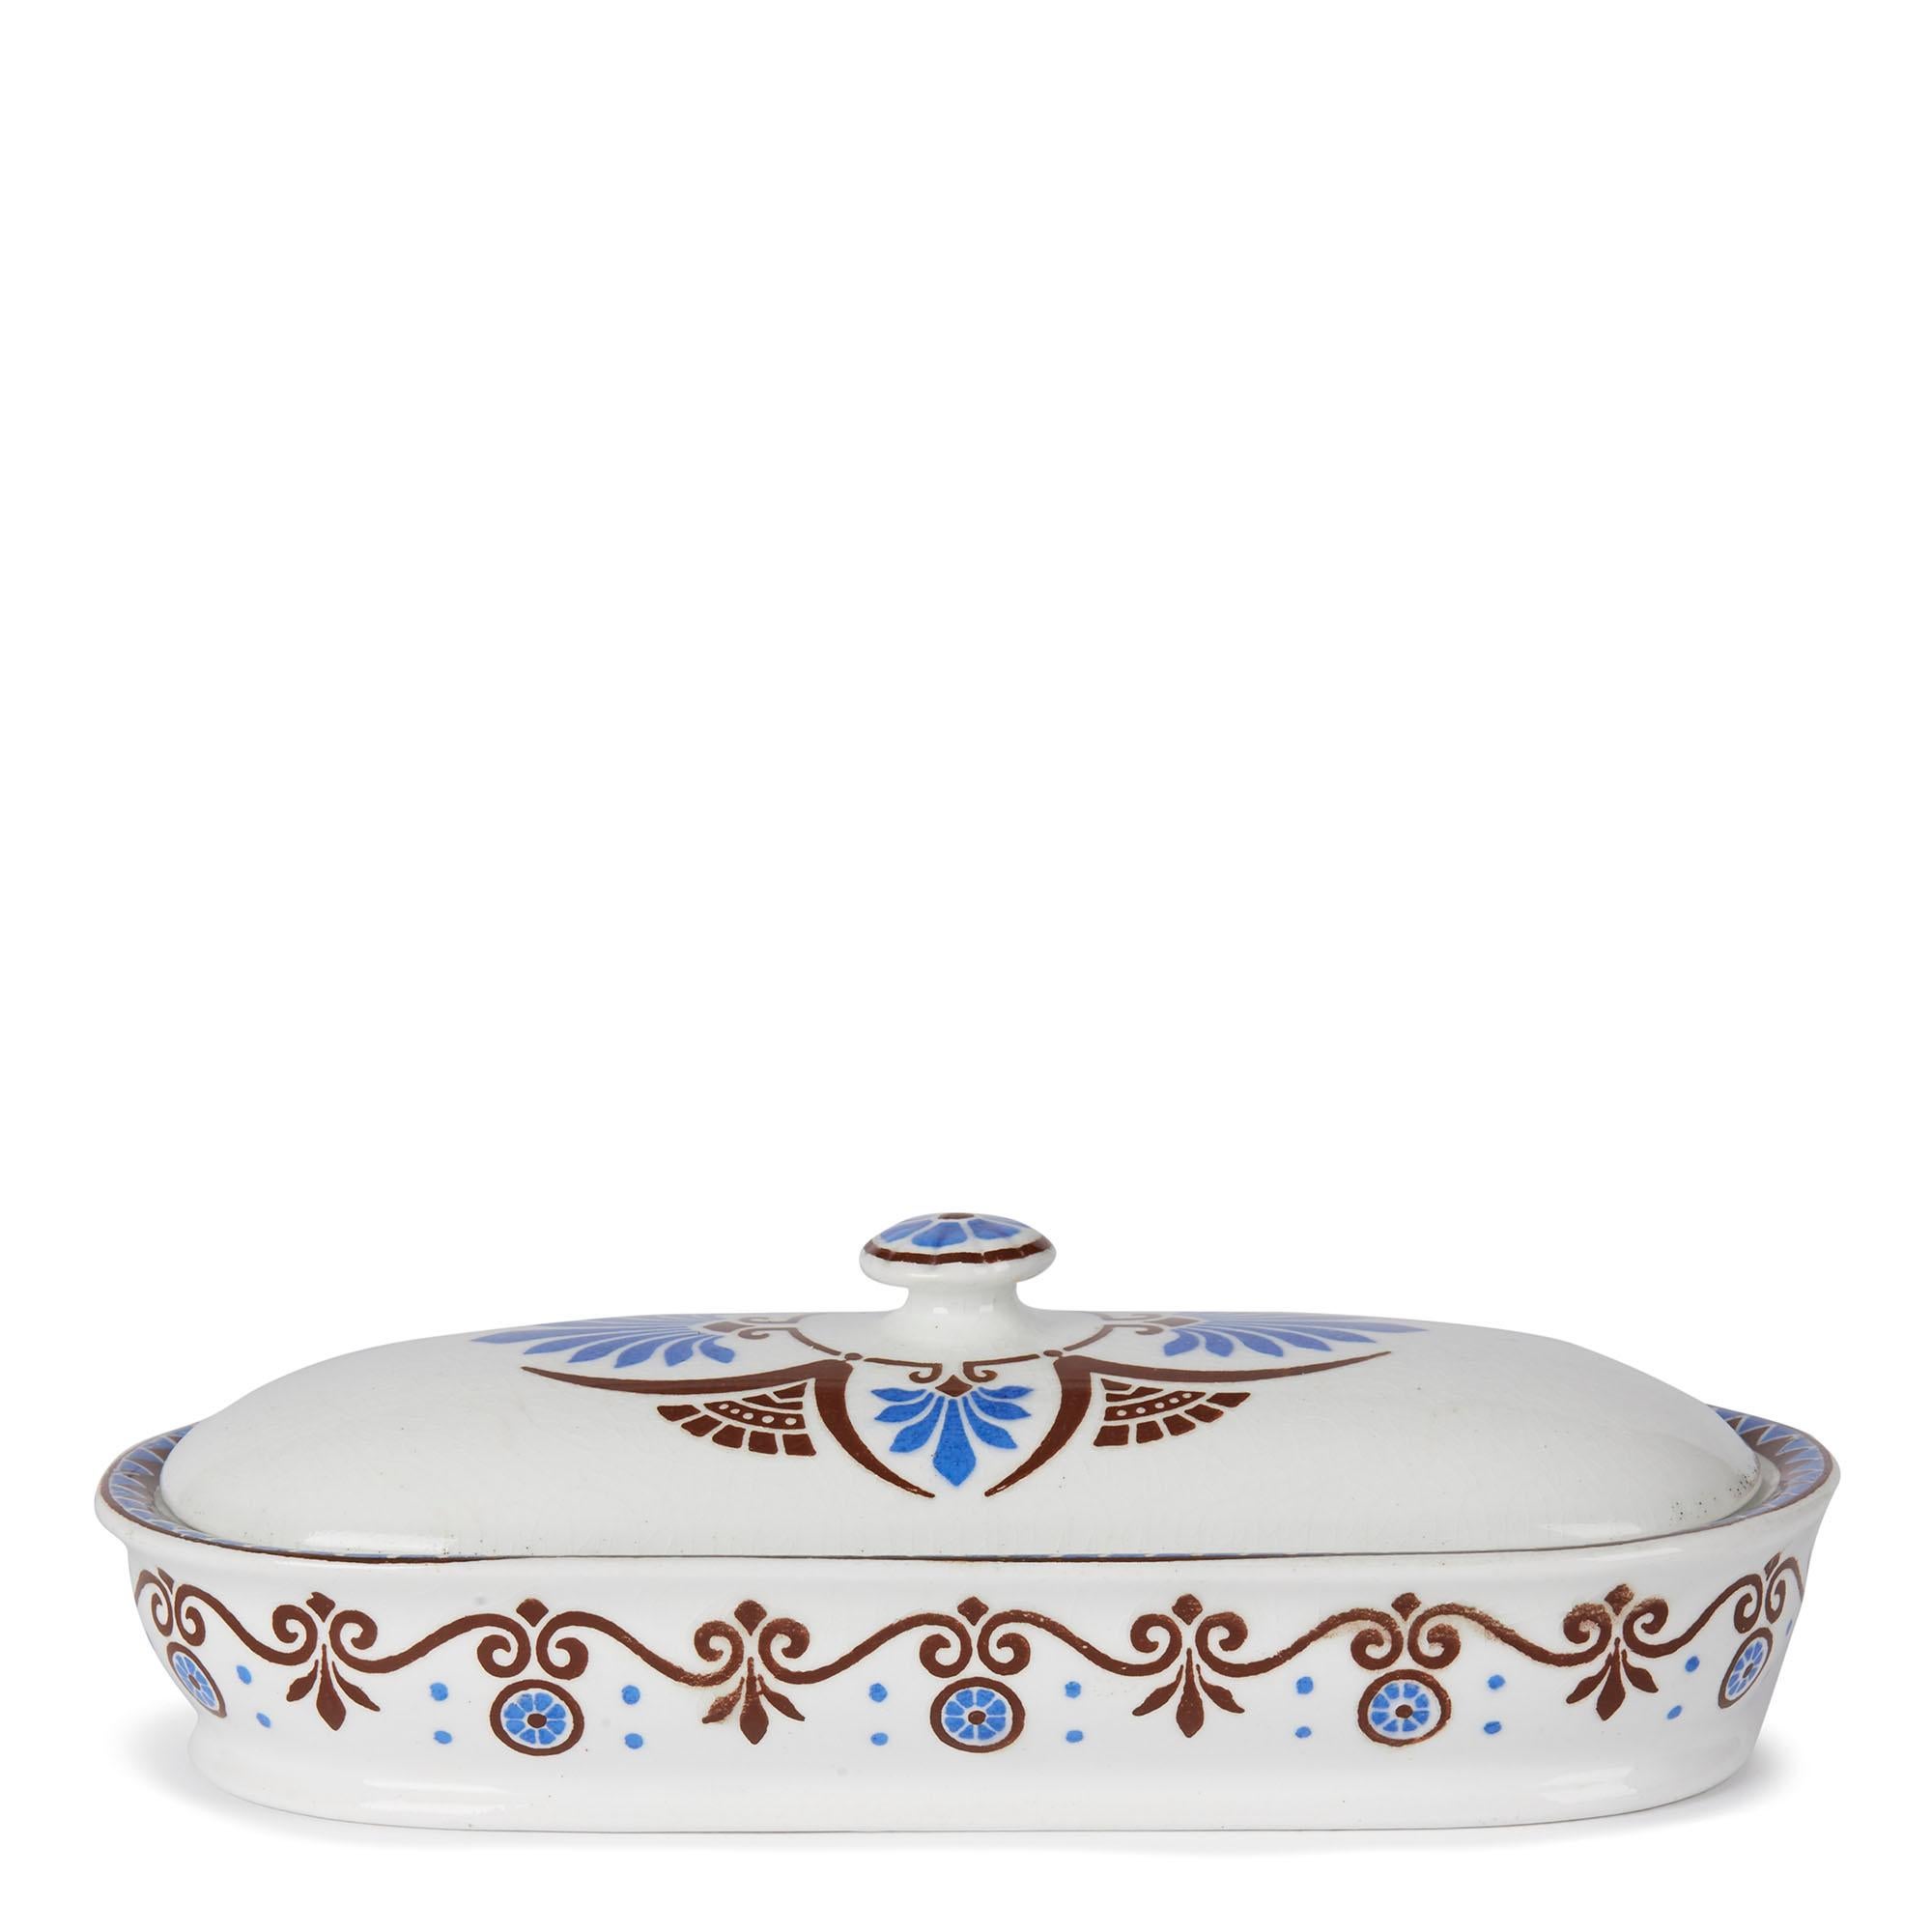 A stylish aesthetic movement Minton pottery bathroom or razor lidded box decorated with a printed design by Christopher Dresser. The long oval ended box has a central domed cover and is decorated in brown and blue printed patterns. The box has